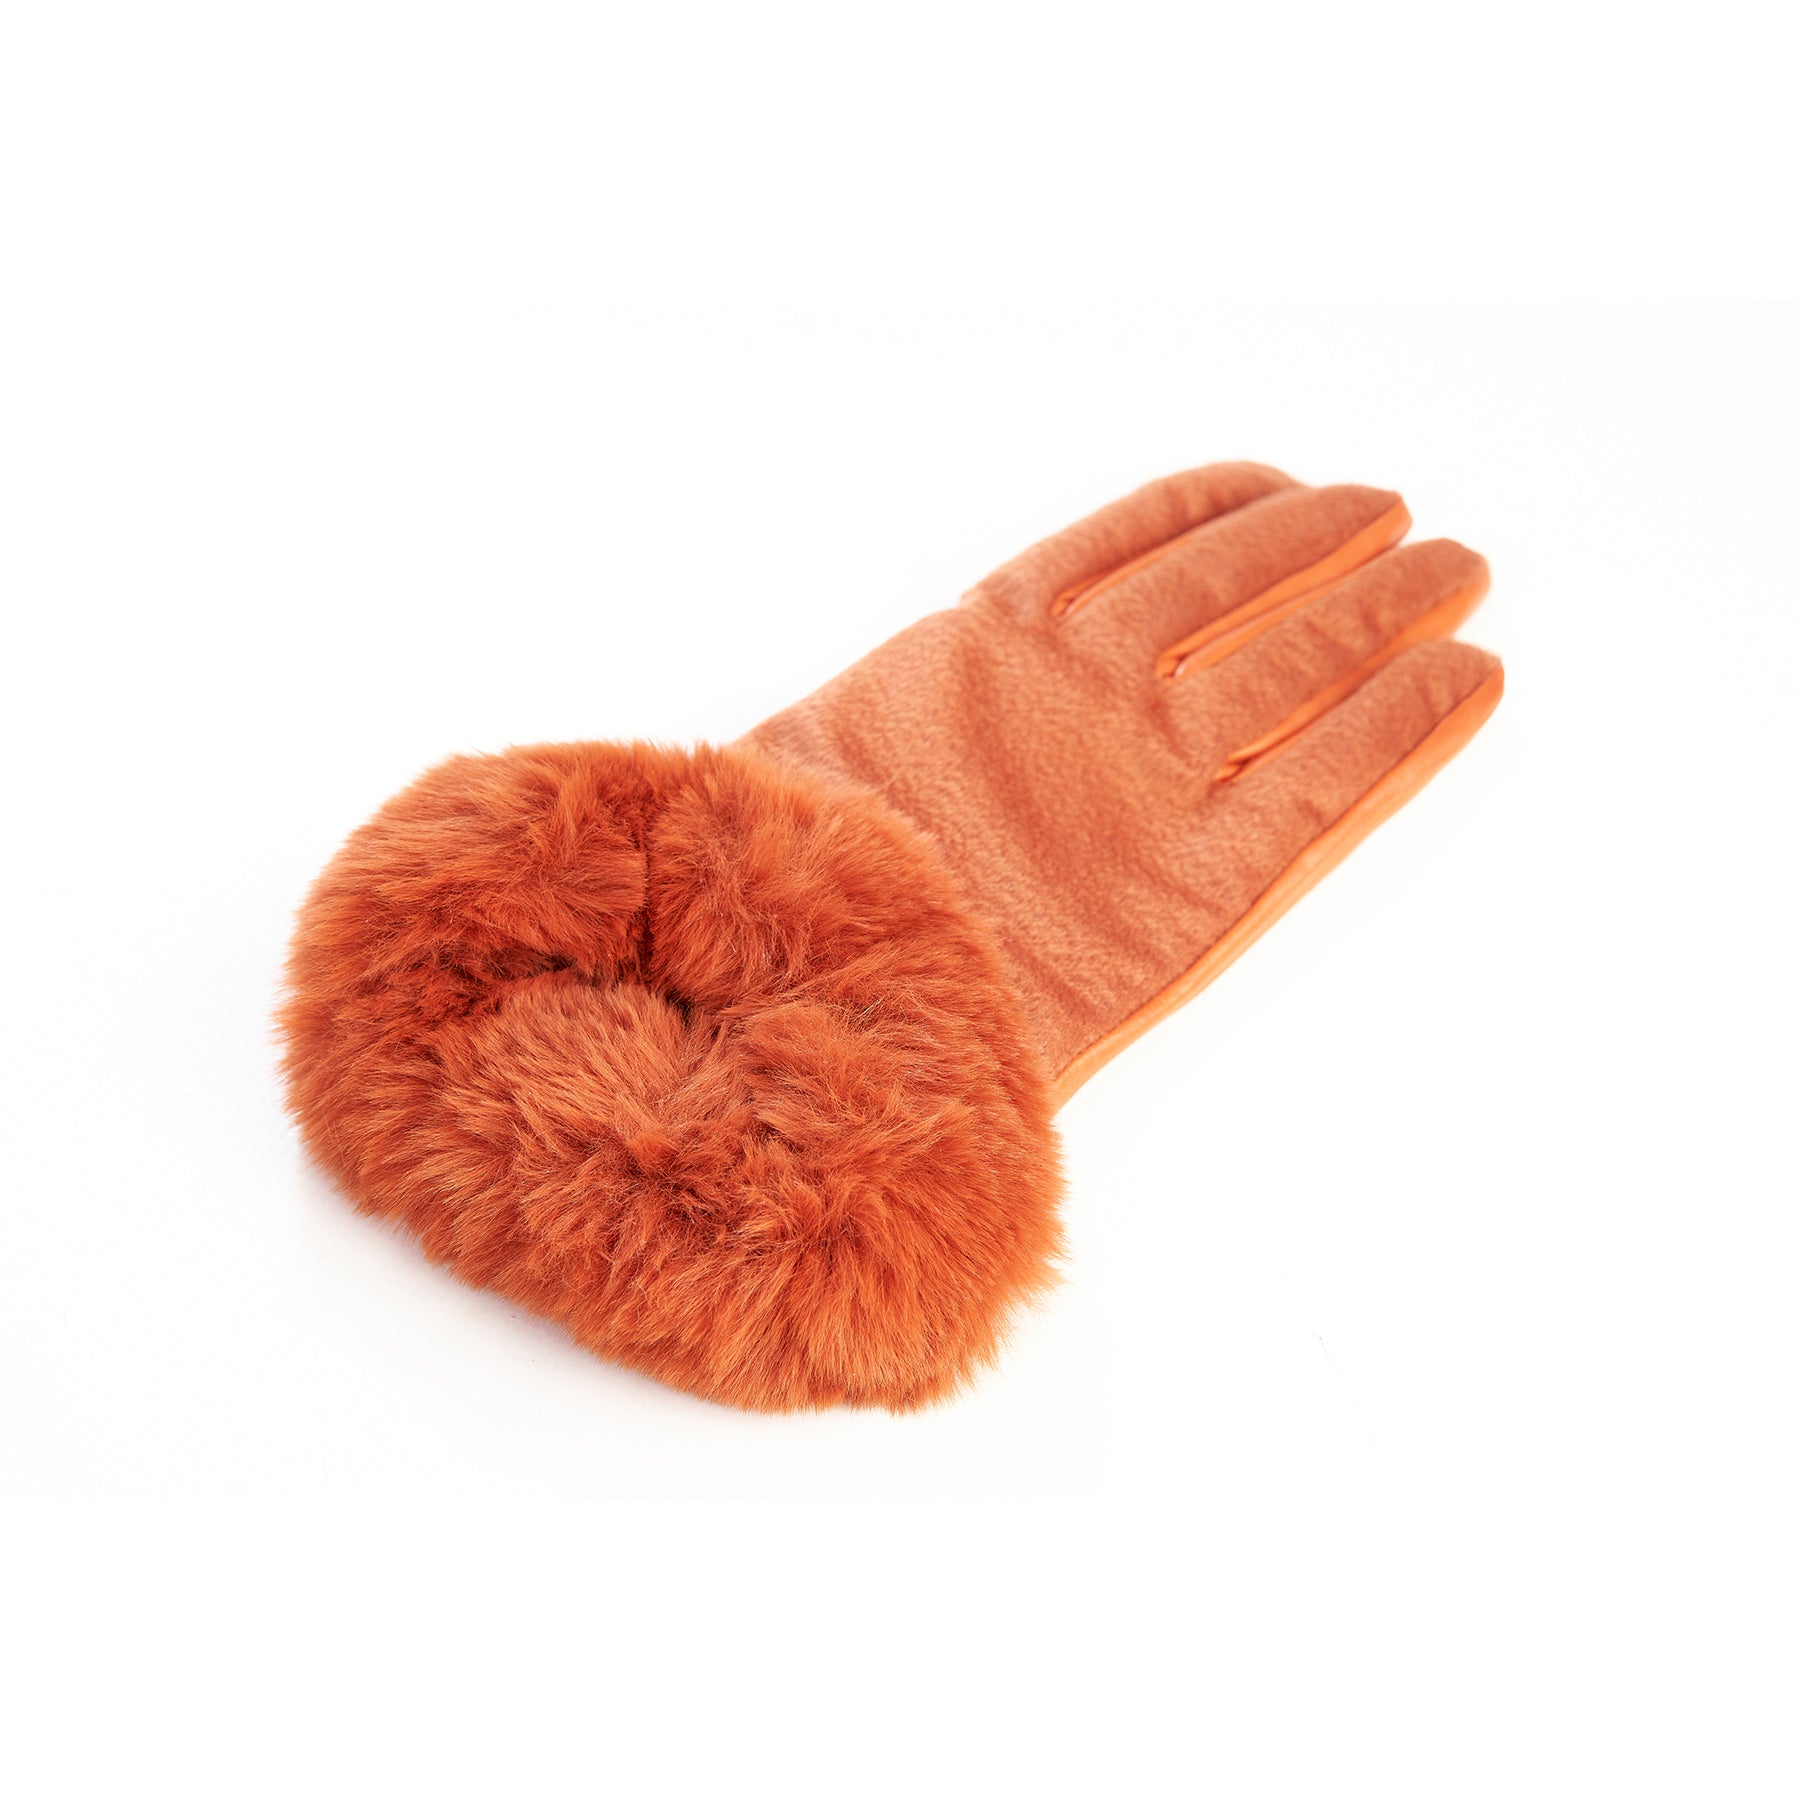 Women's orange leather gloves with pure Holland & Sherry cashmere top detail eco fur cuff